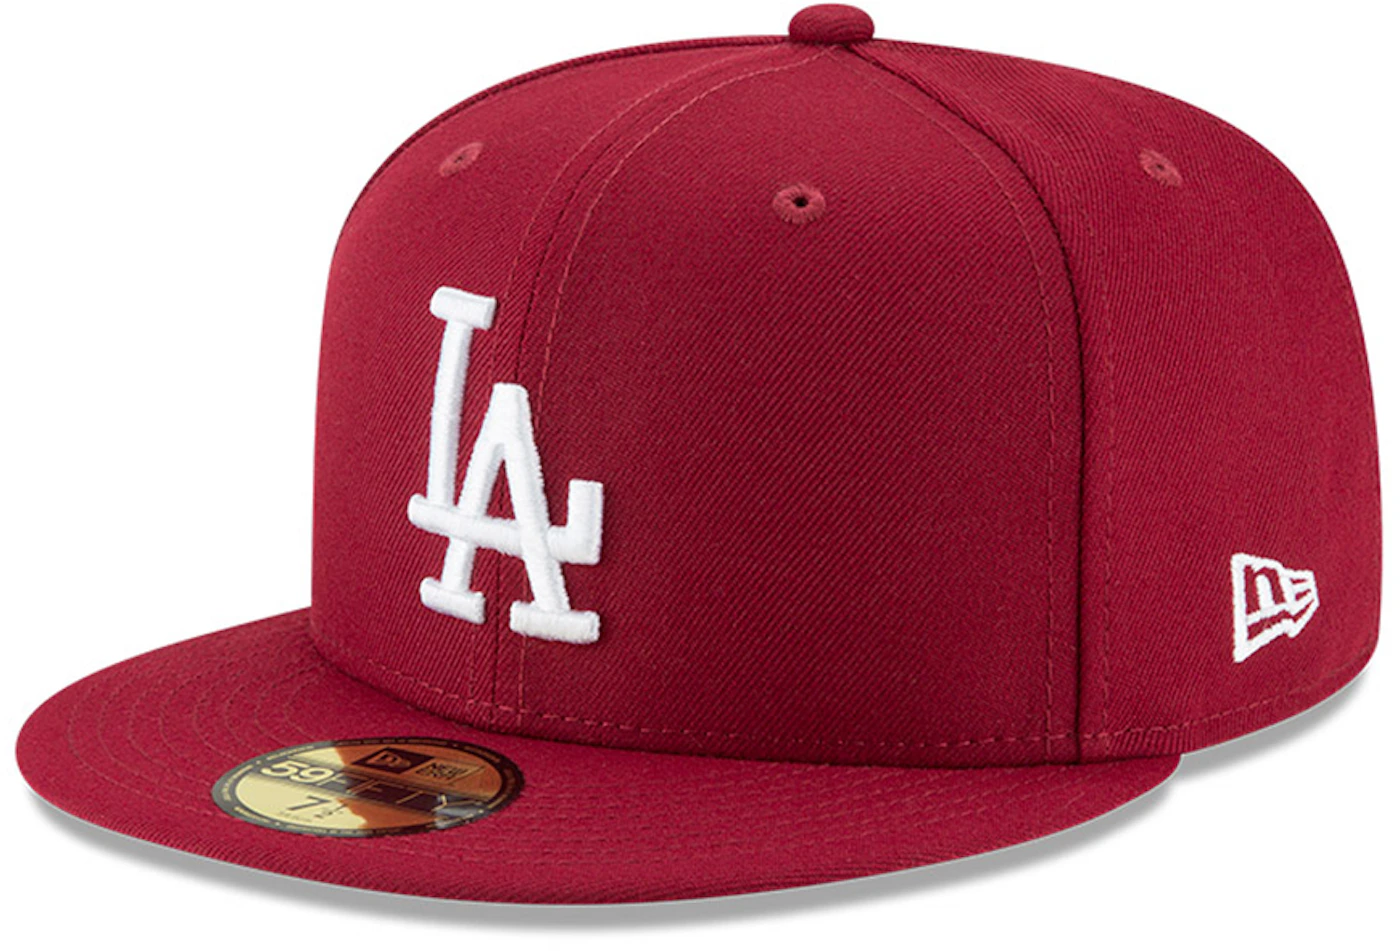 Men's New Era Stone/Black Los Angeles Dodgers Chrome 59FIFTY Fitted Hat